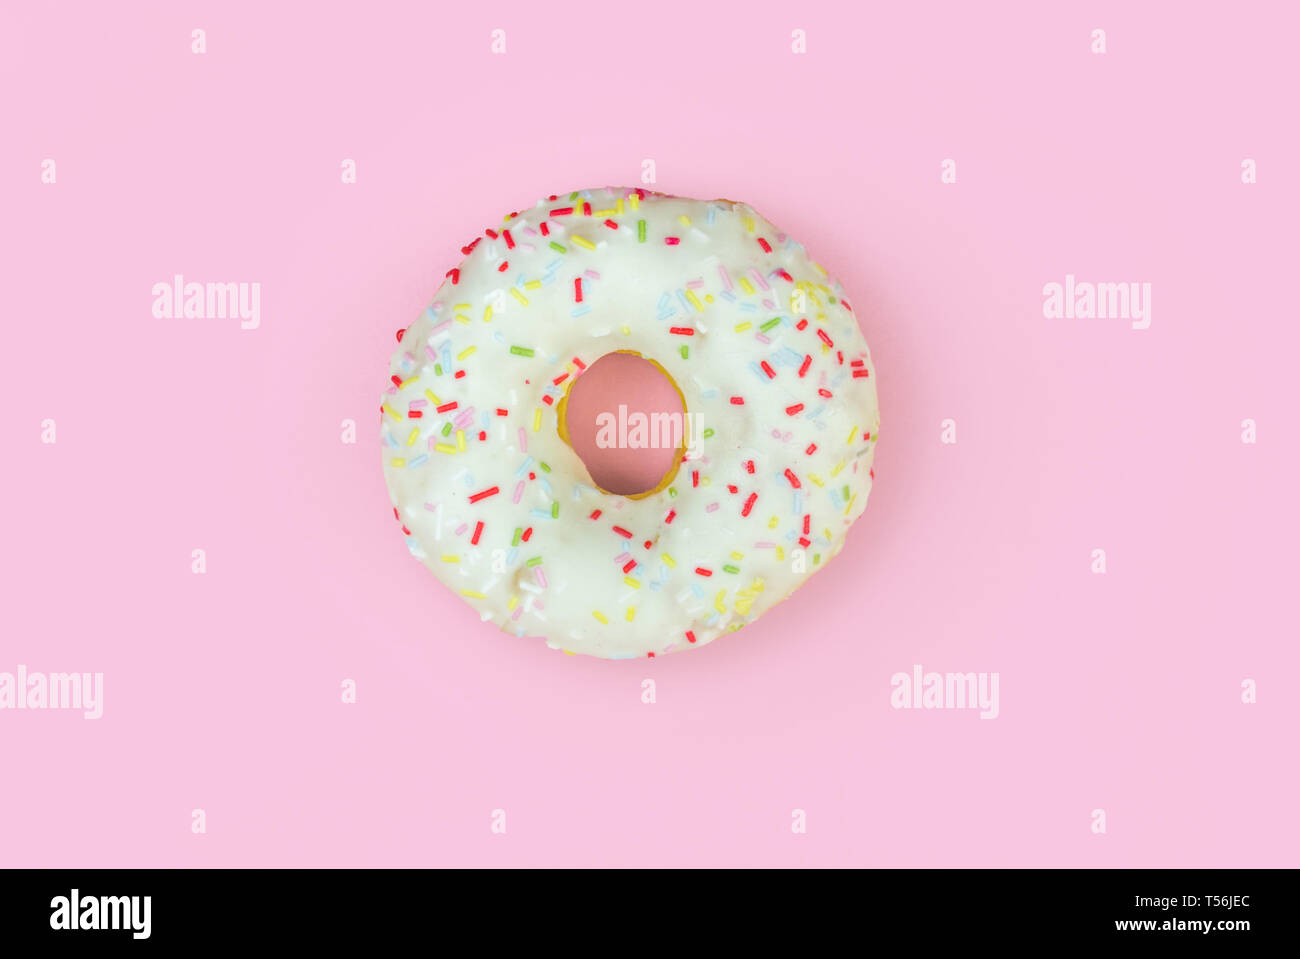 White round donut on pink background. Flat lay, top view. Stock Photo